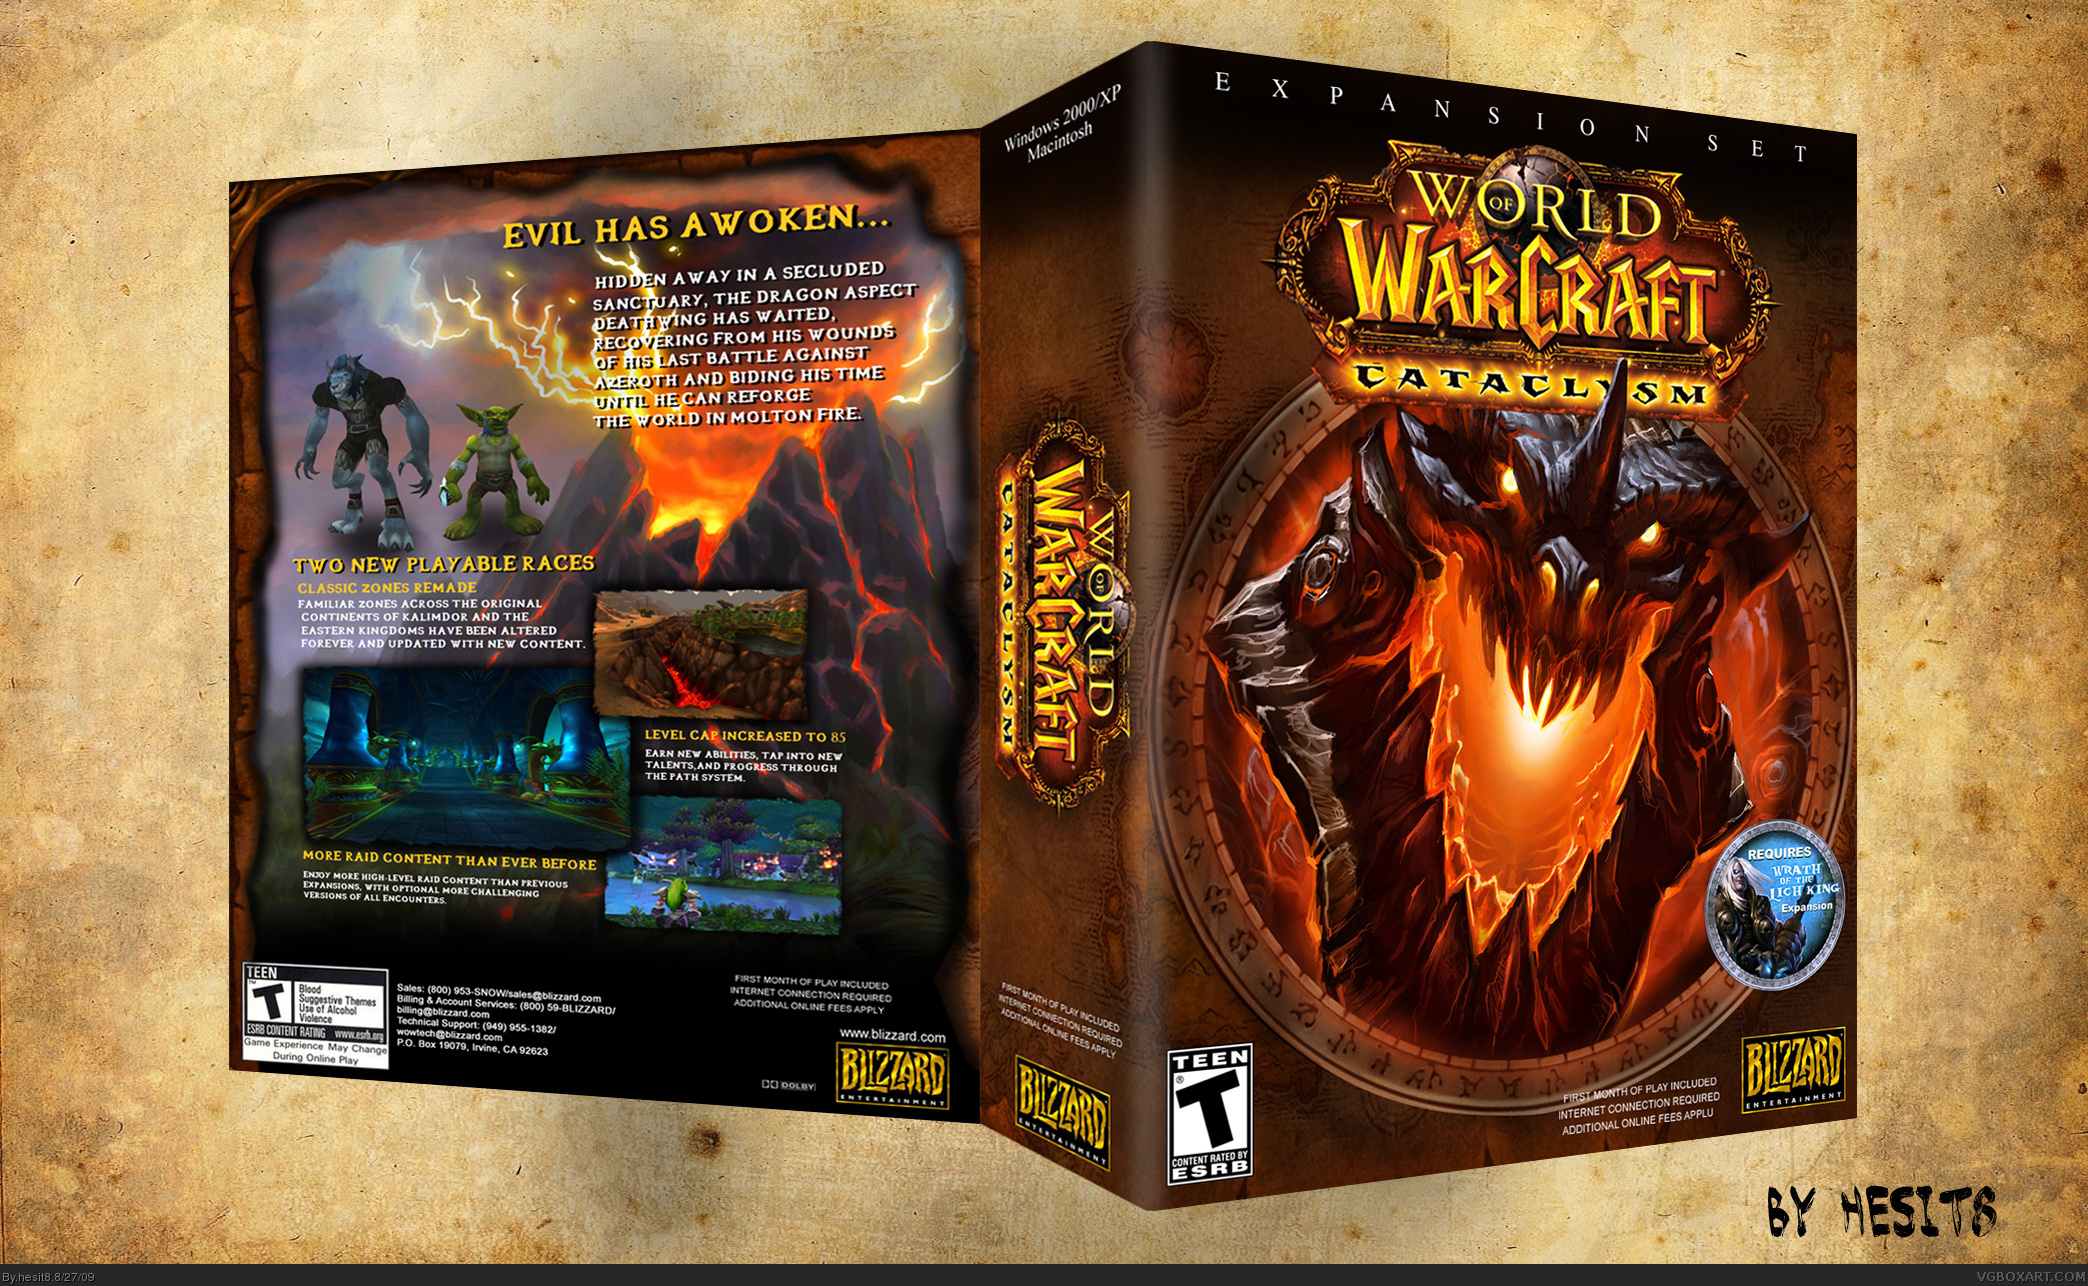 World of Warcraft: Cataclysm box cover